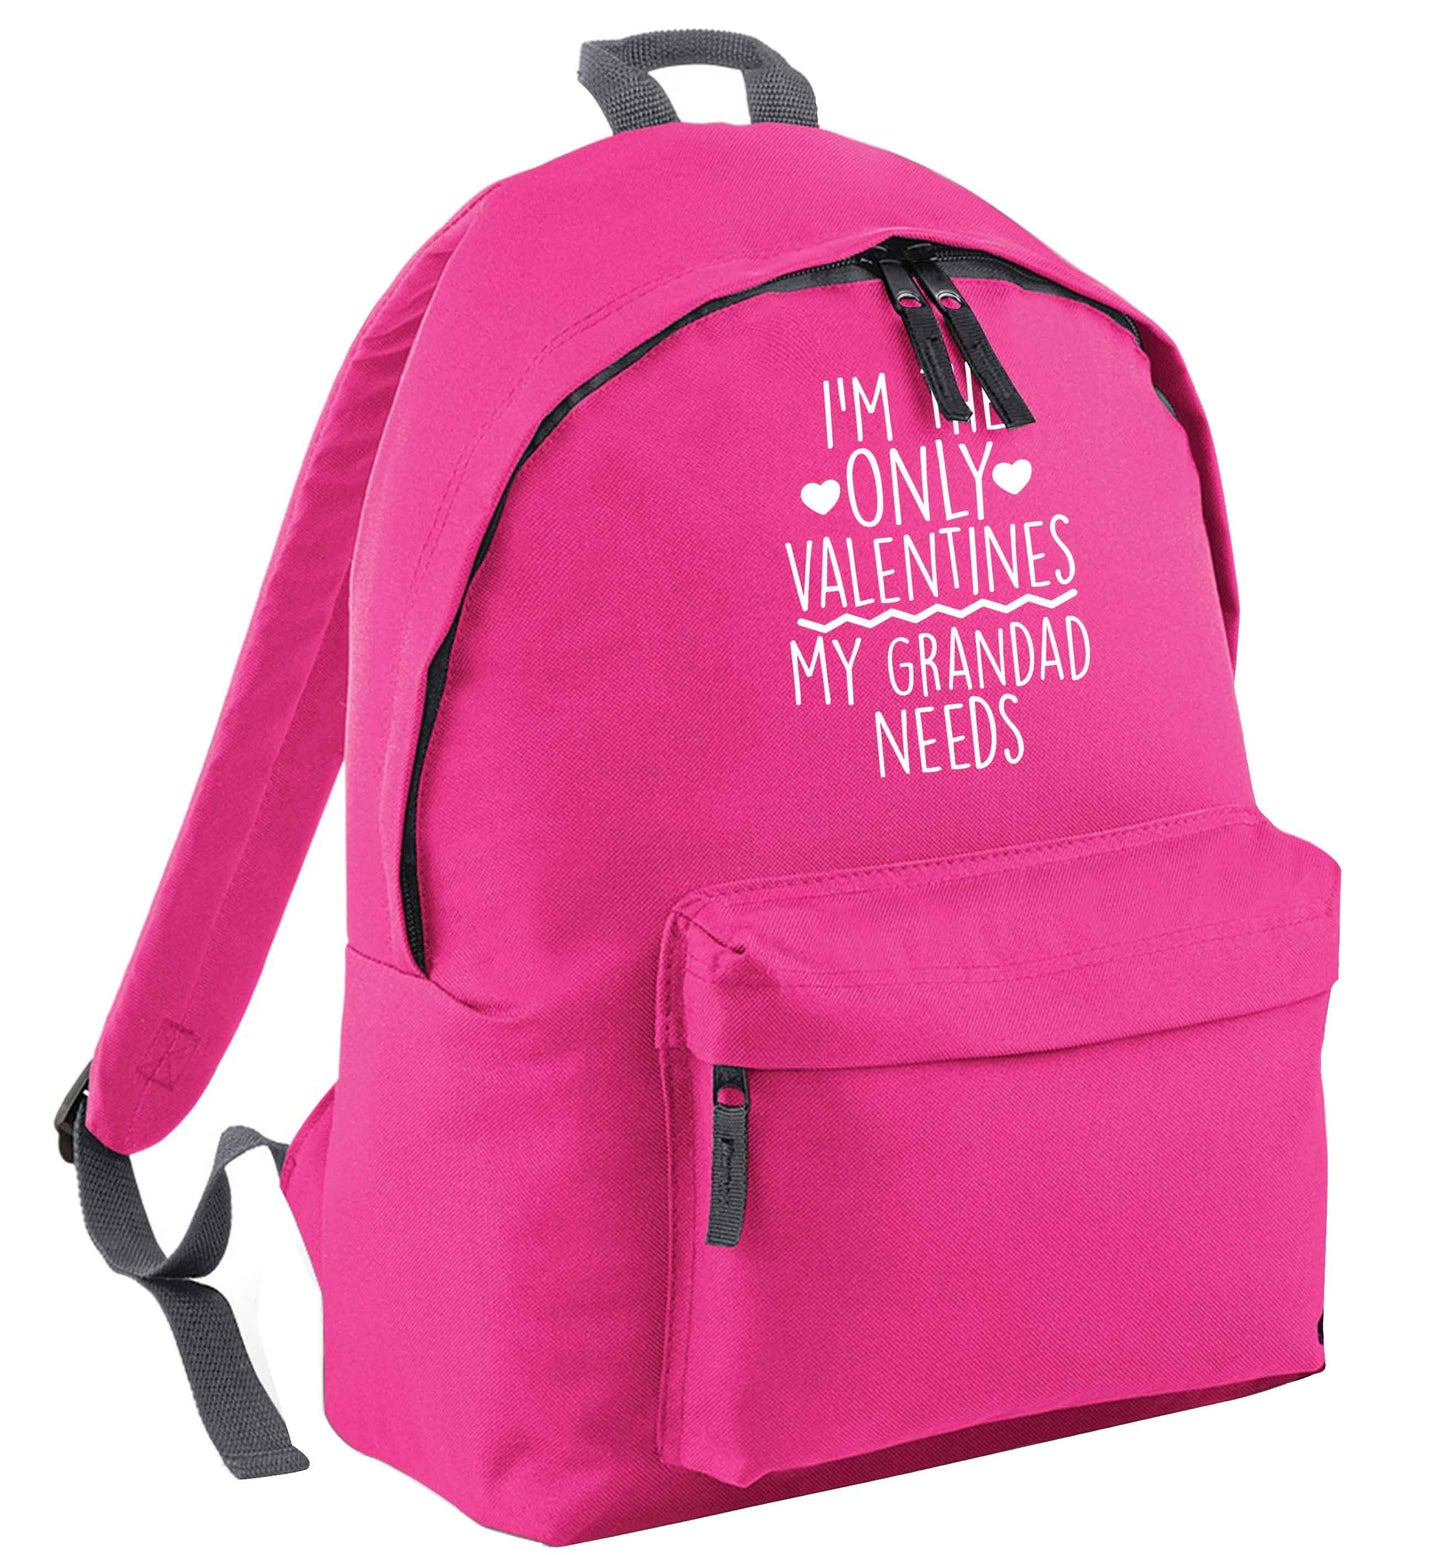 I'm the only valentines my grandad needs pink adults backpack